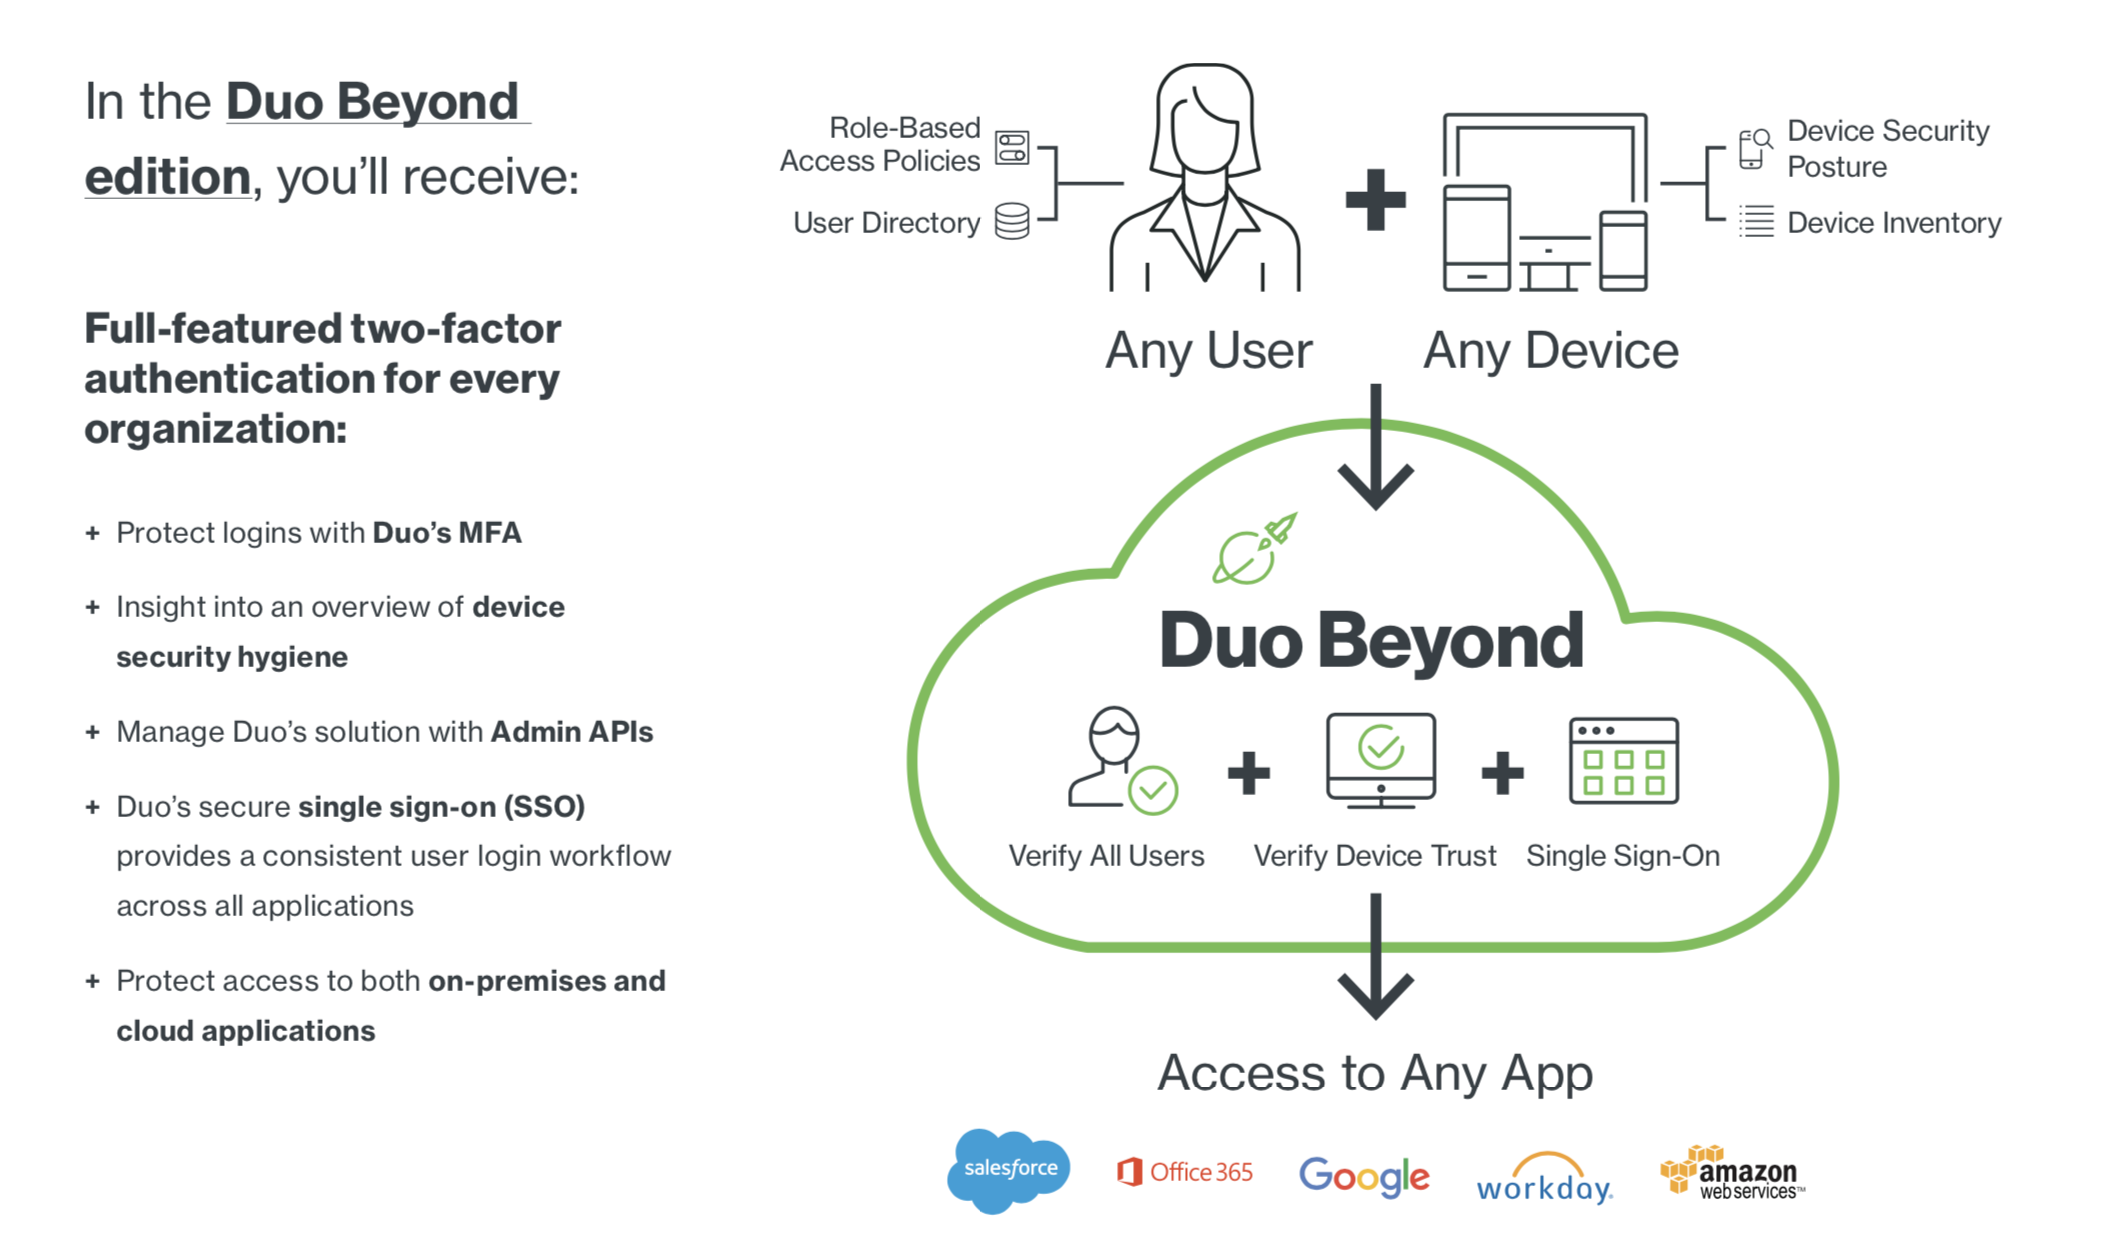 With Duo Beyond, you'll receive full-featured two-factor authentication for every organization, any user & any device.